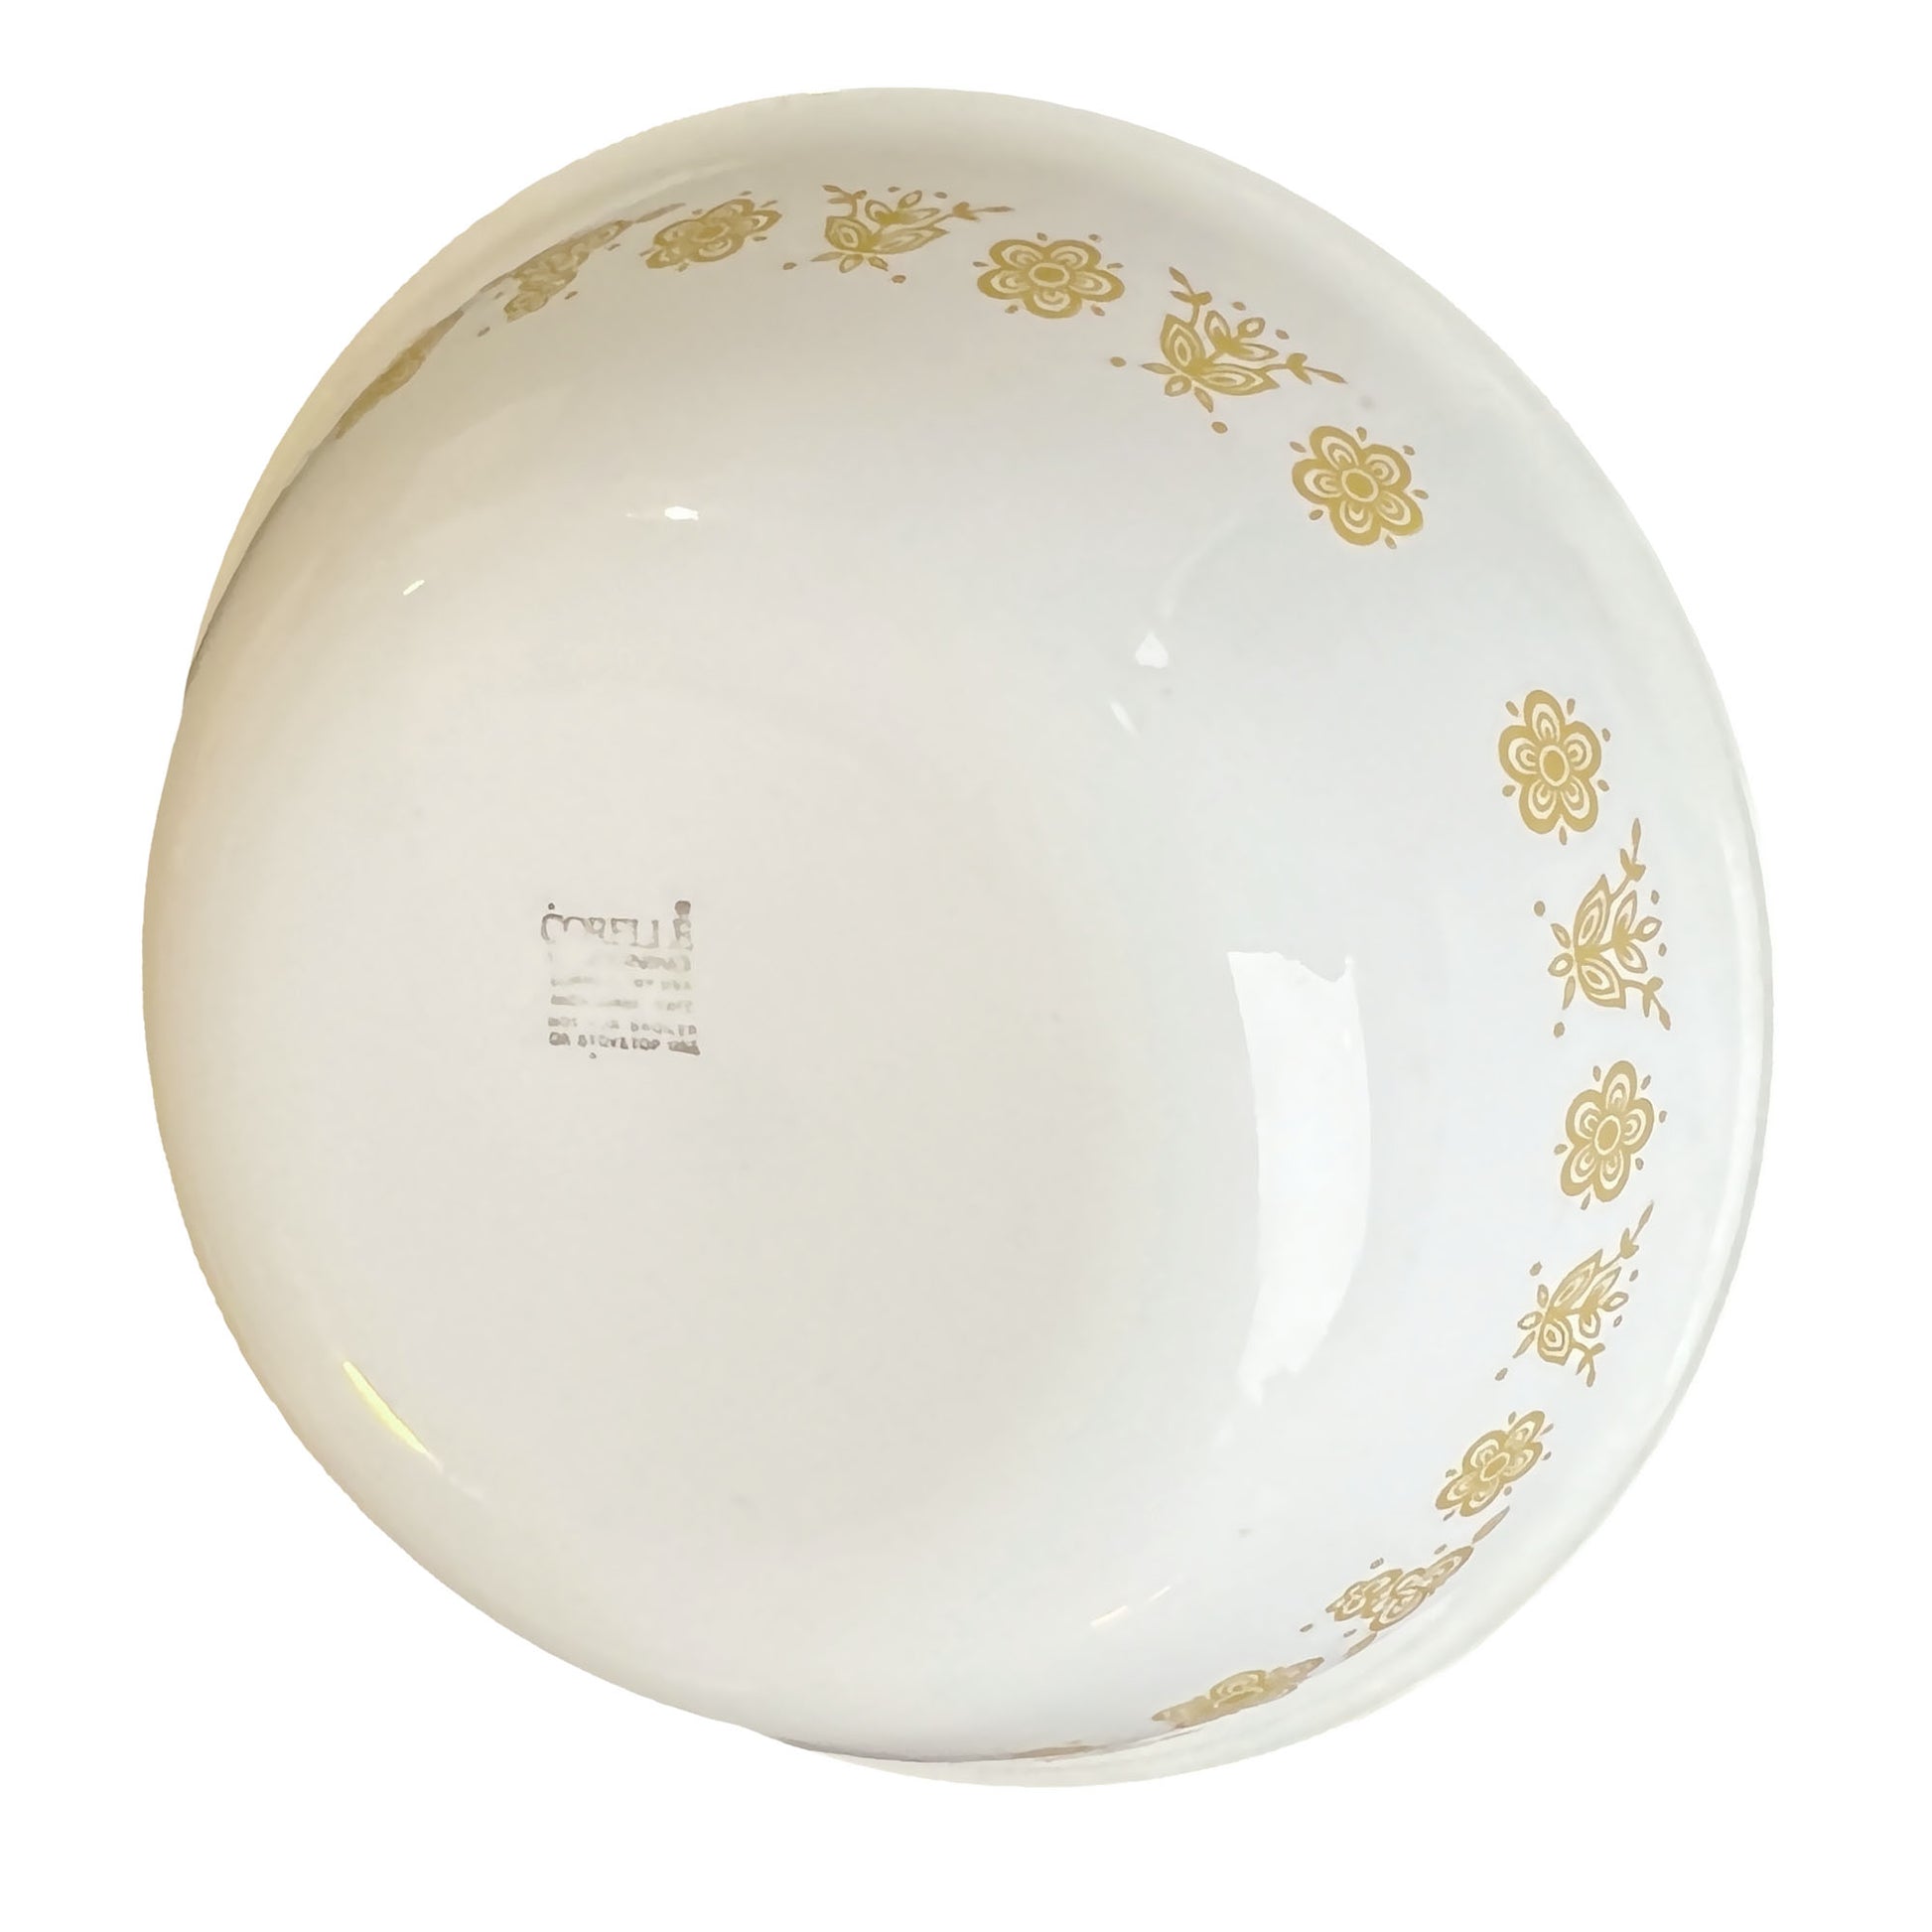 Corelle-Butterfly-Gold-8.5-in-Serving-Bowl-by-Corning.-Bottom-angle-view.-Shop-eBargainsAndDeals.com